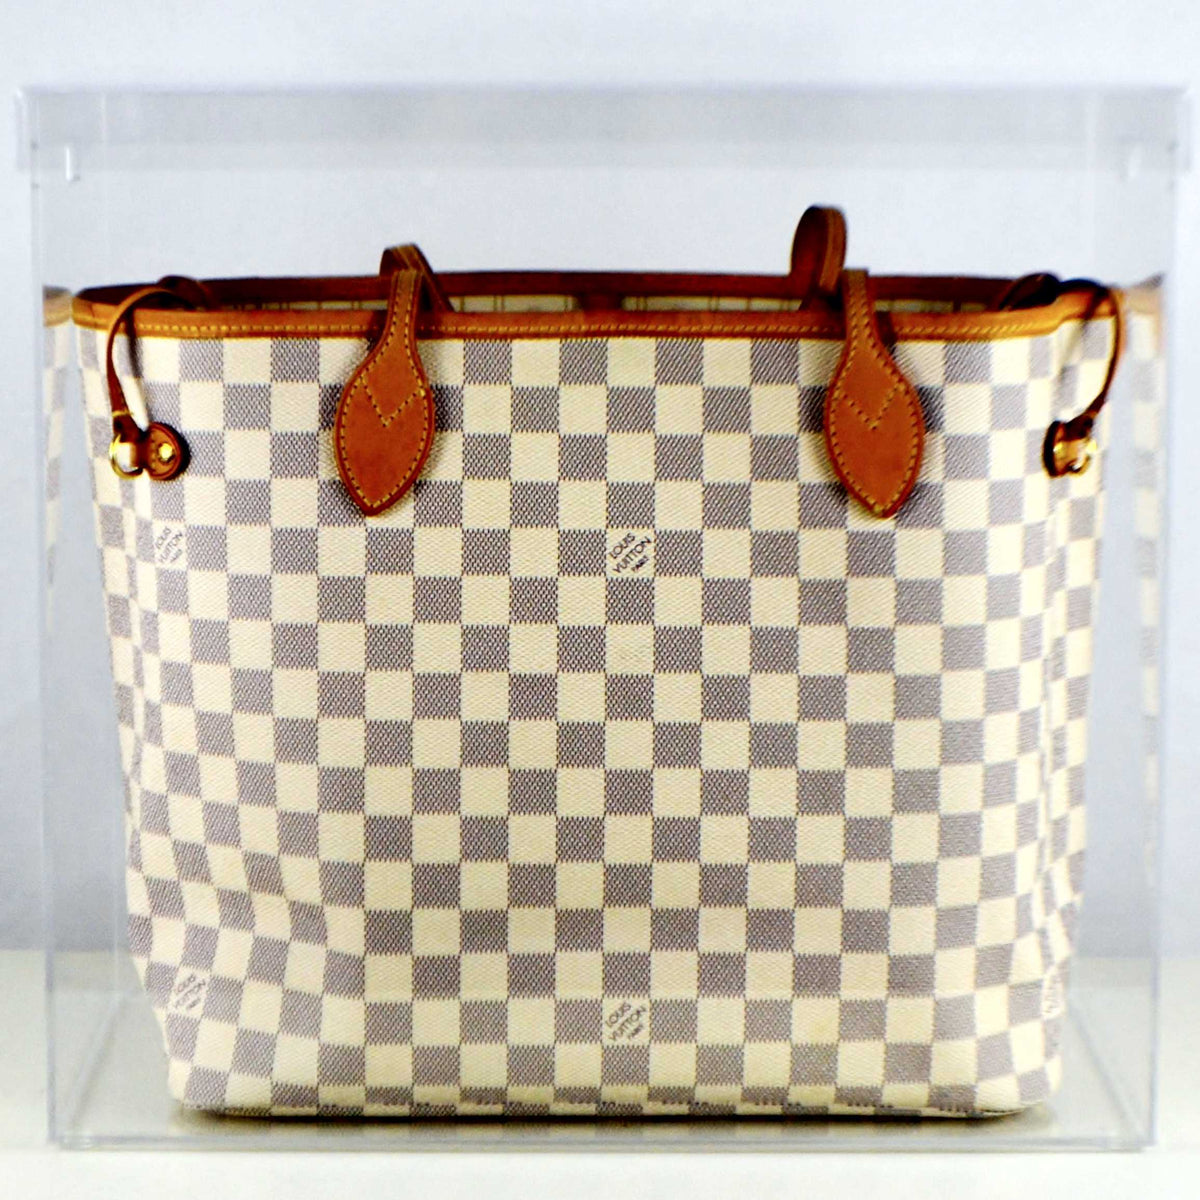 How to store Louis Vuitton Neverfull II Designer handbag care and